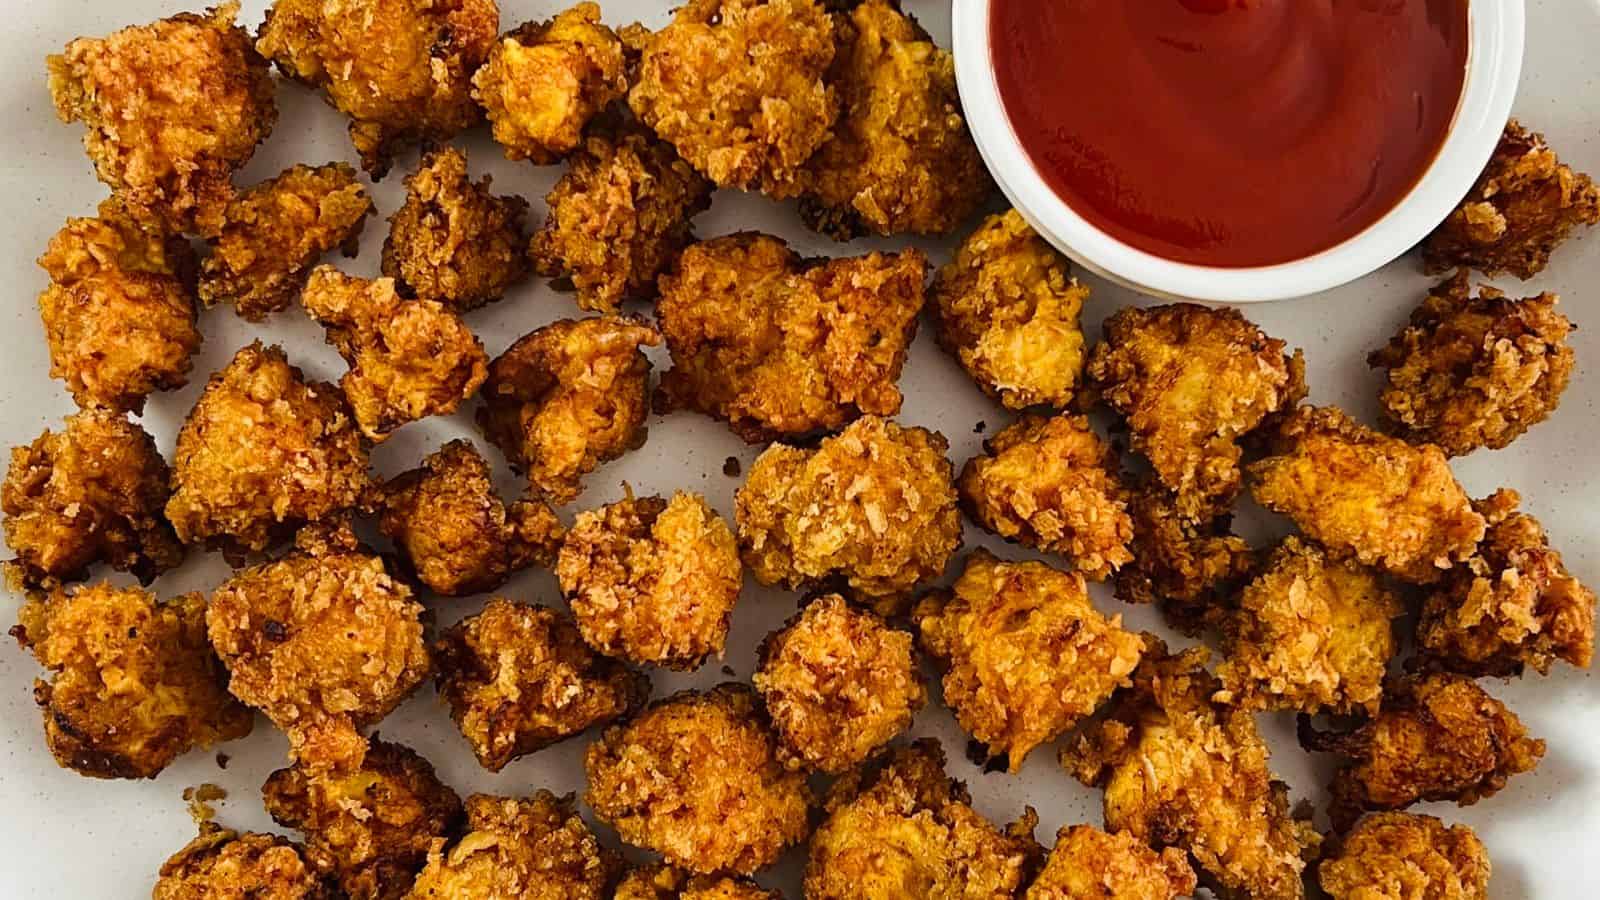 A plate of crispy, golden-brown popcorn chicken pieces next to a small white bowl of red dipping sauce.